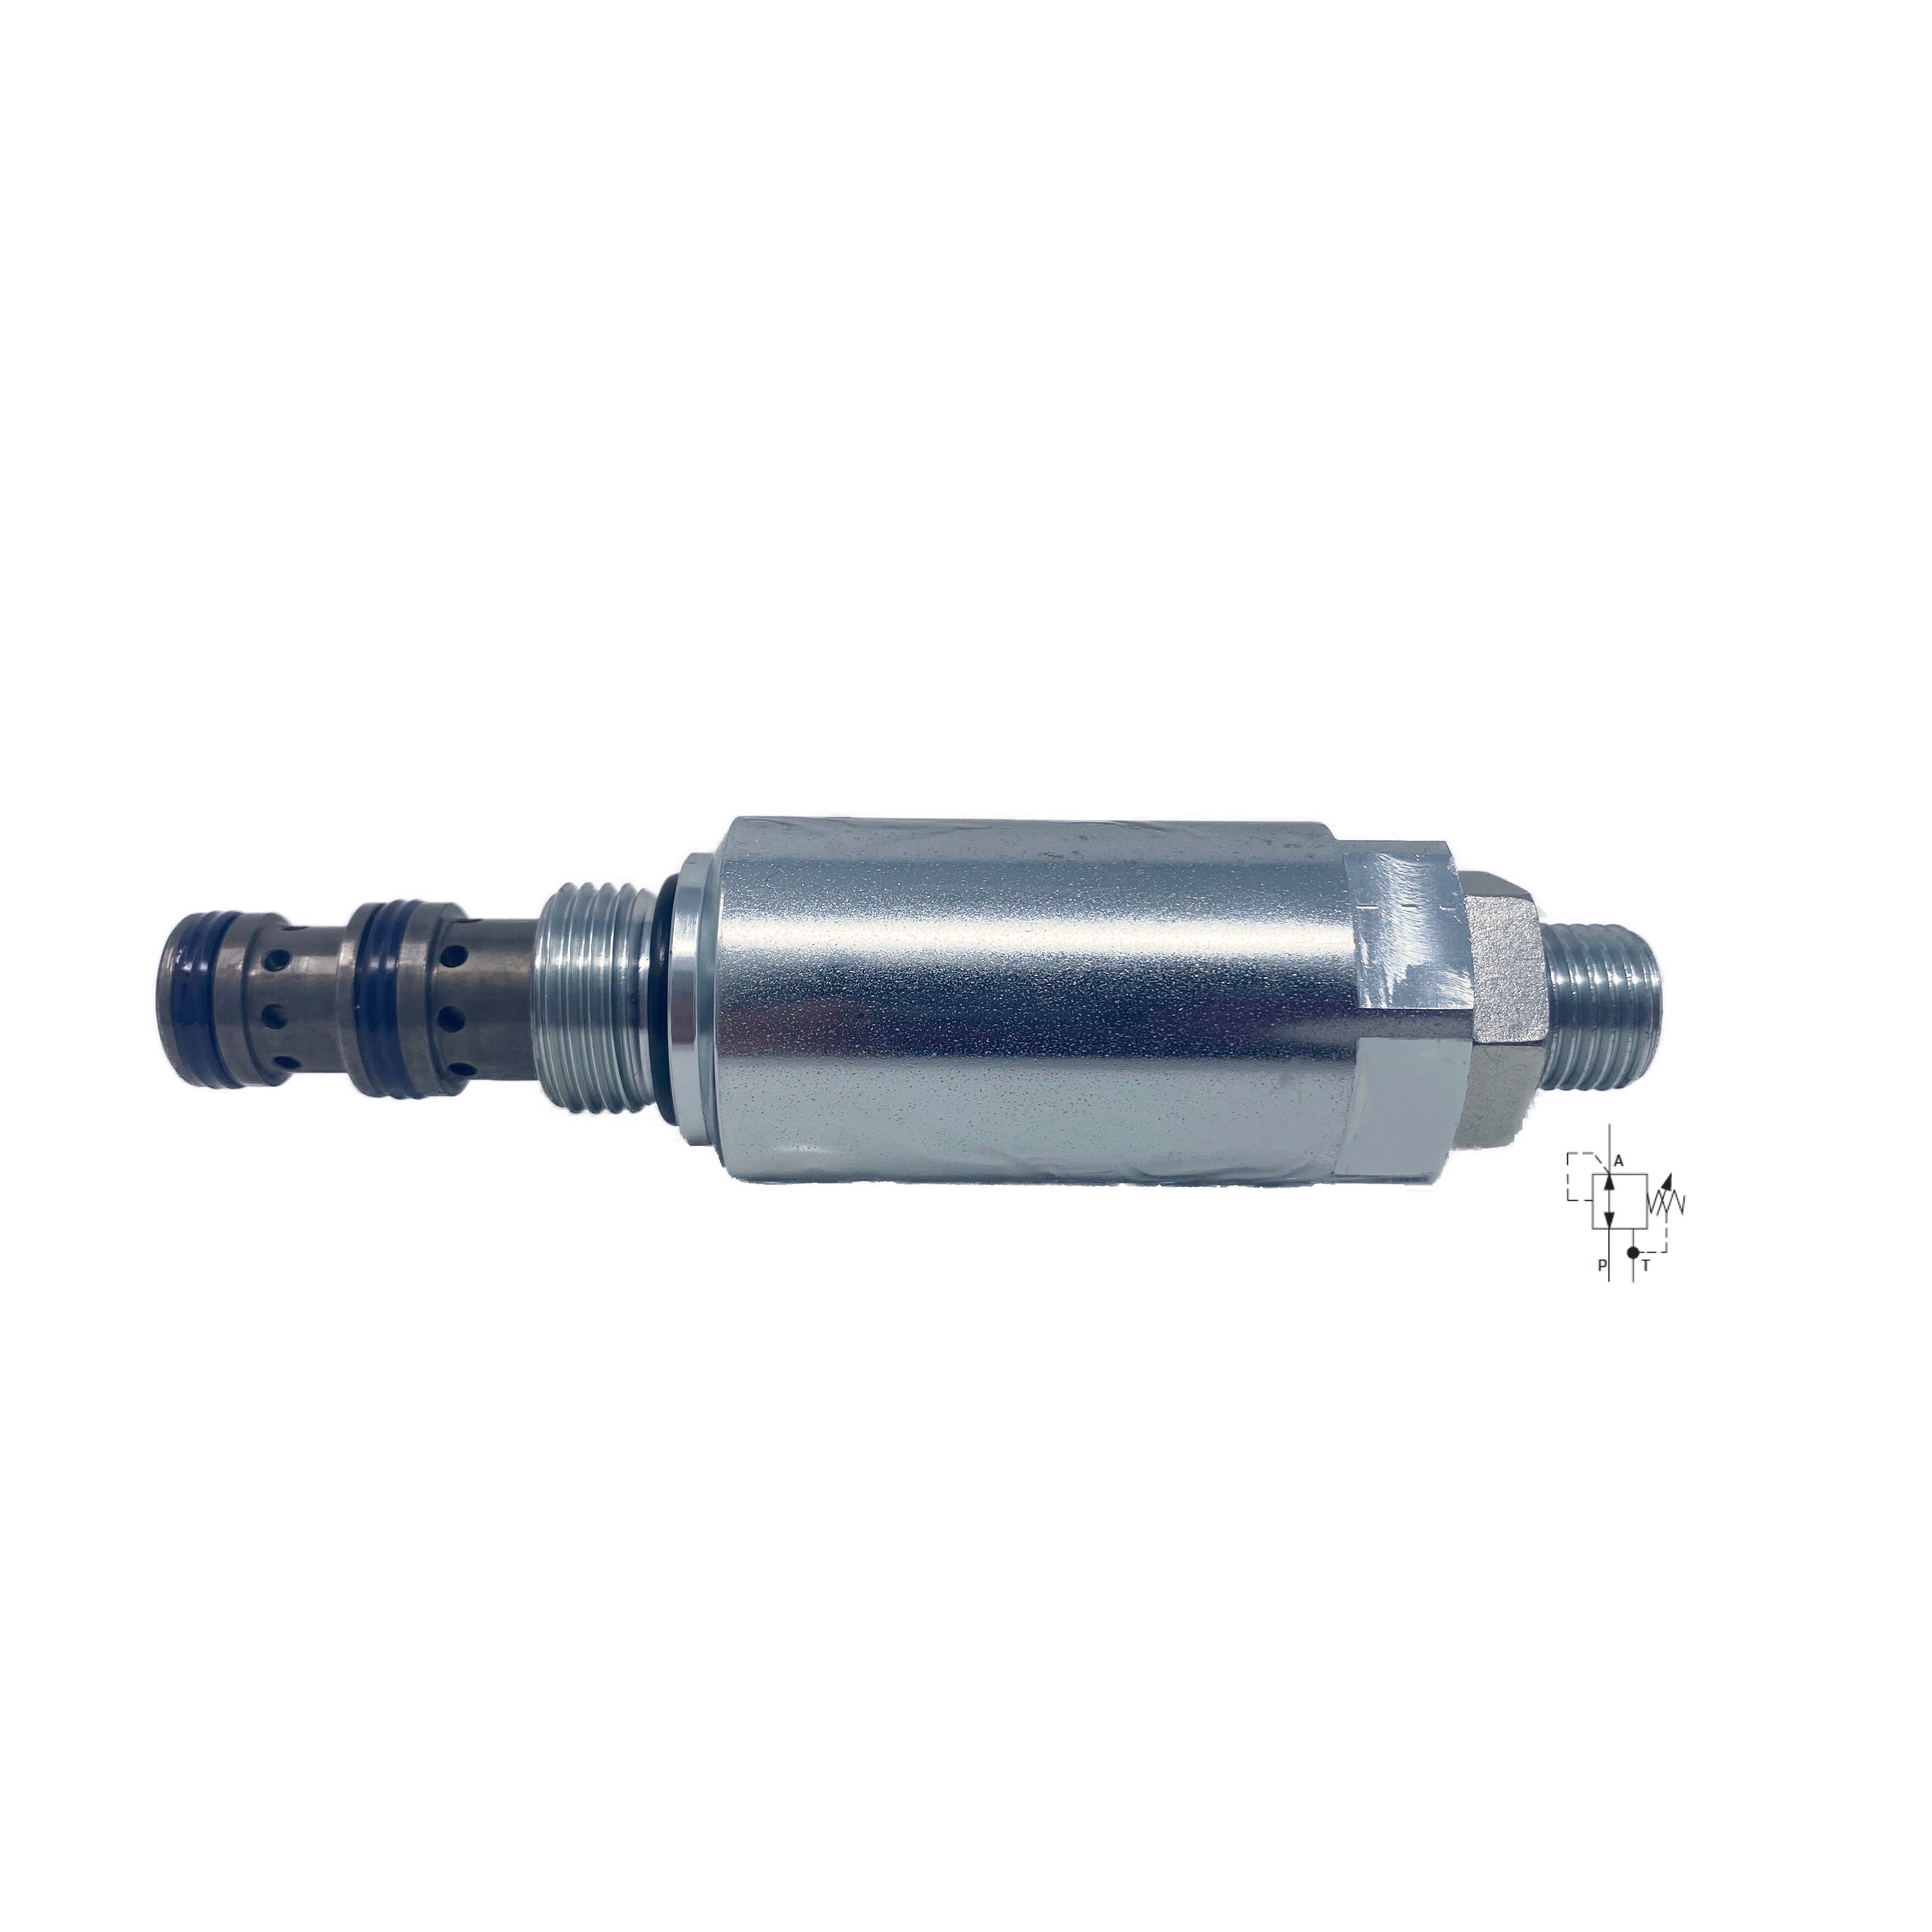 SP2A-A3/L6S-A : Argo Pressure Reducing-Relieving Valve, Spool Type, Direct Acting, 5 GPM, 5100psi rated, 290-910psi Adjustmet, Allen Key Screw, C-8-3